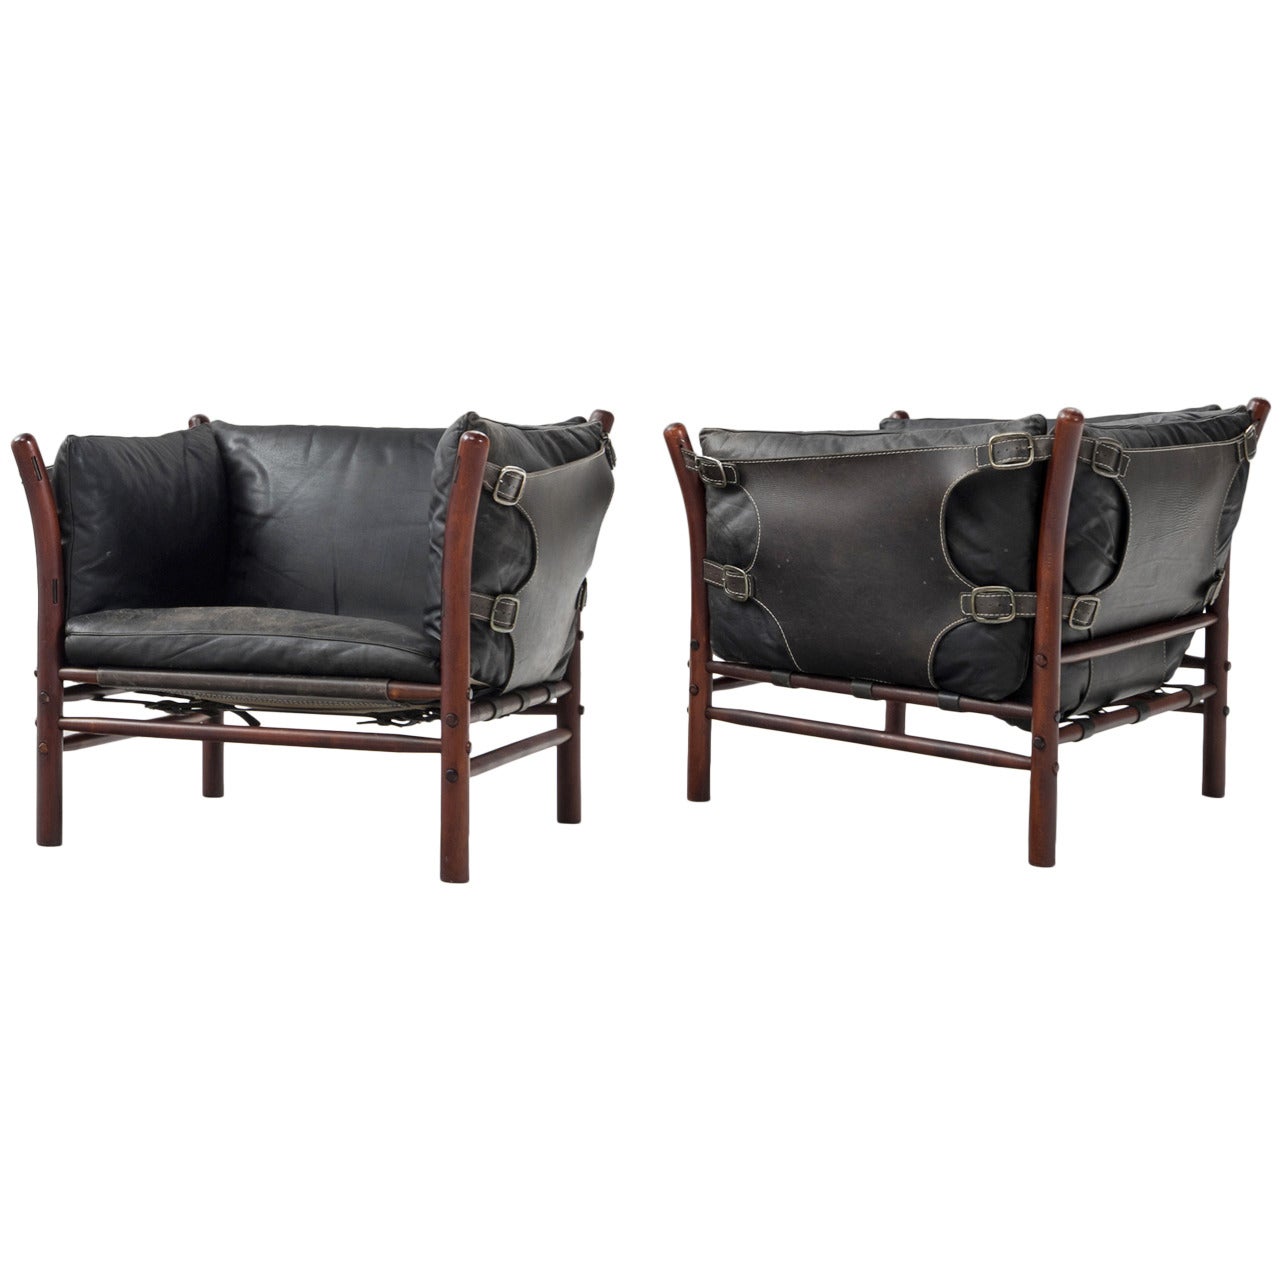 Arne Norell Pair of 'Ilona' Club Chairs in Black Leather